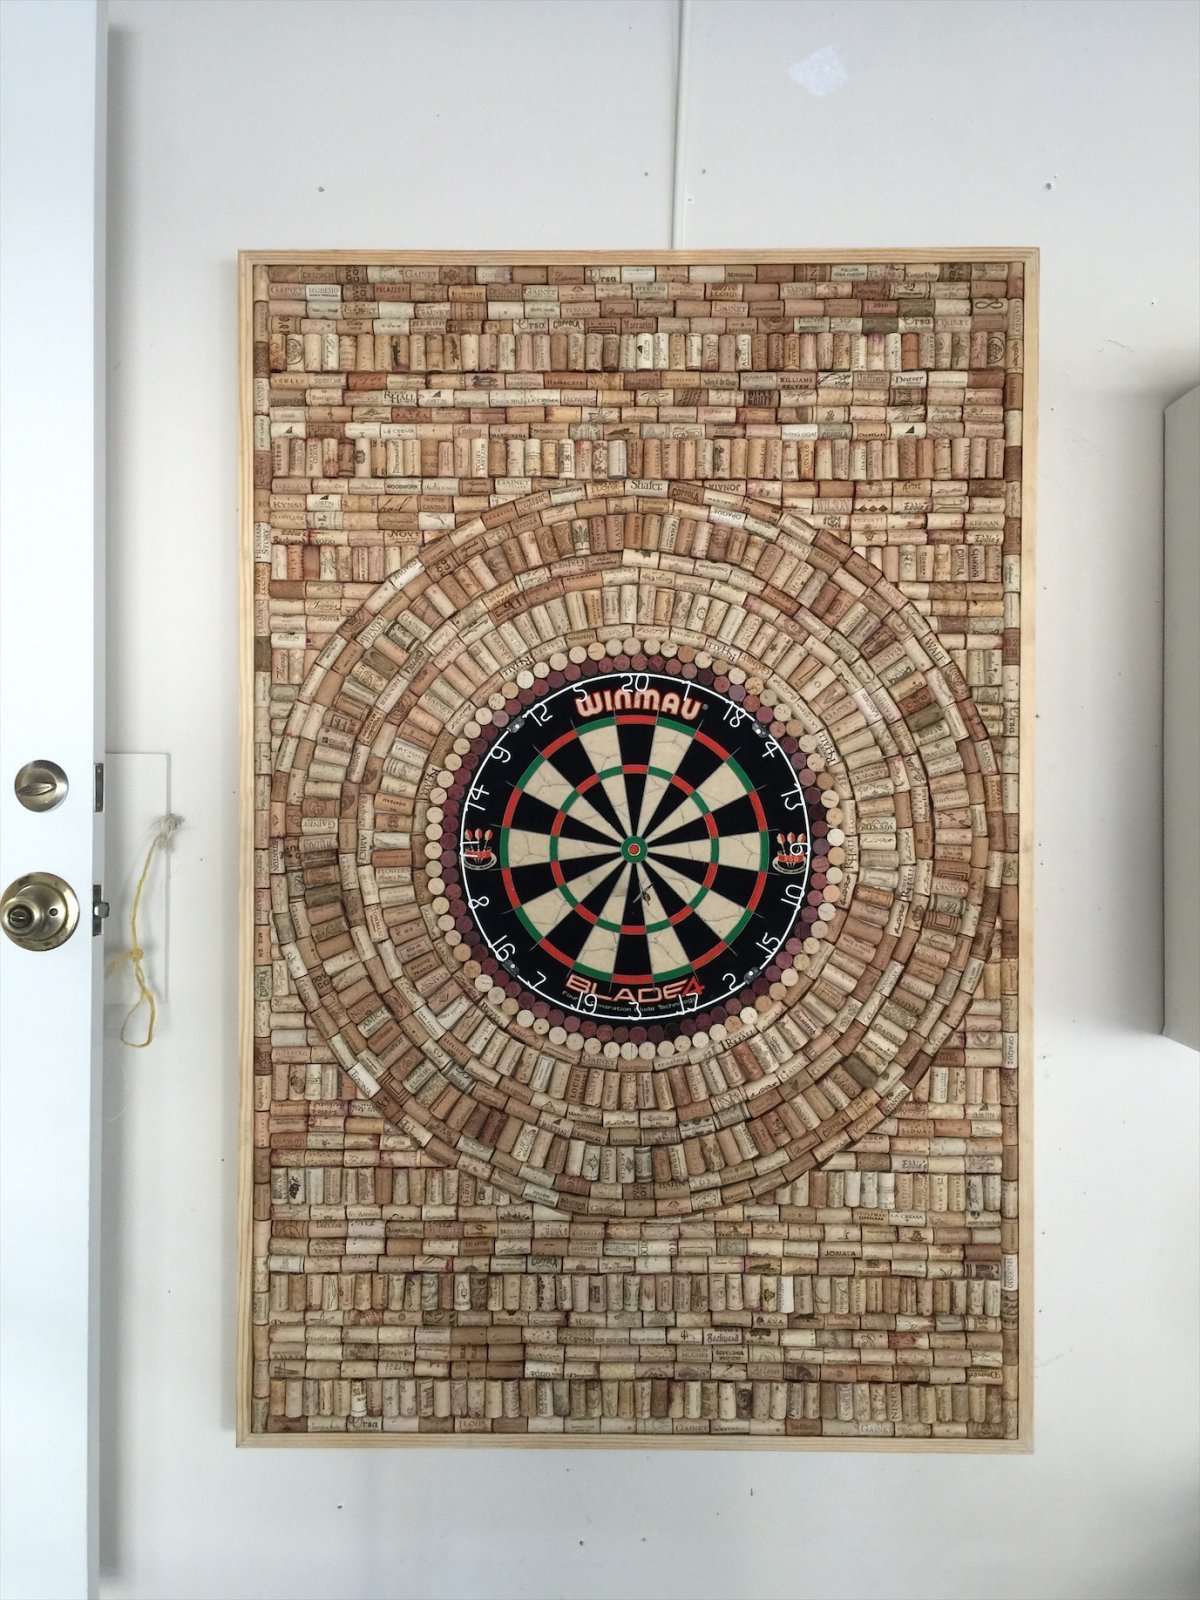 How To Make a Wine Cork Dartboard - MY 100 YEAR OLD HOME